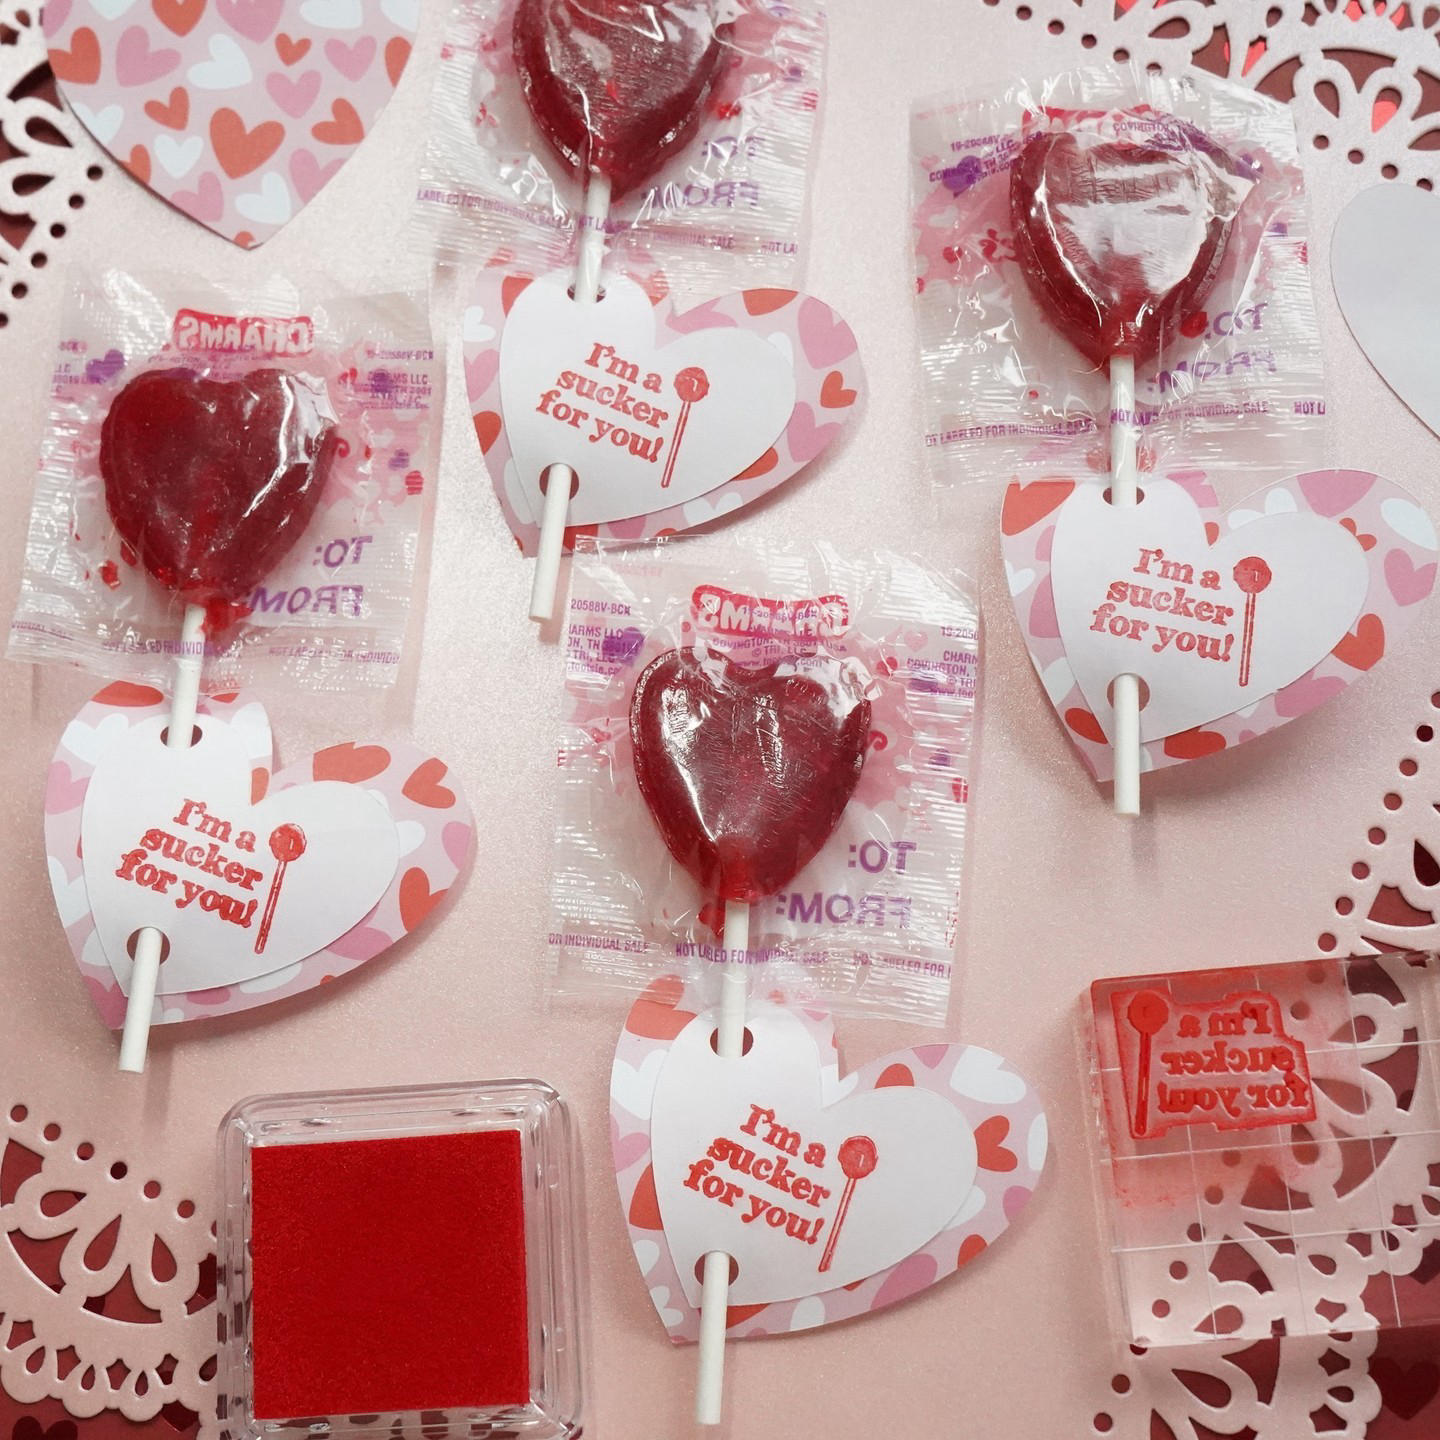 VALENTINE'S DAY INSPIRATION⁠⁠These classic lollipop notes can be right at home with some stamps and